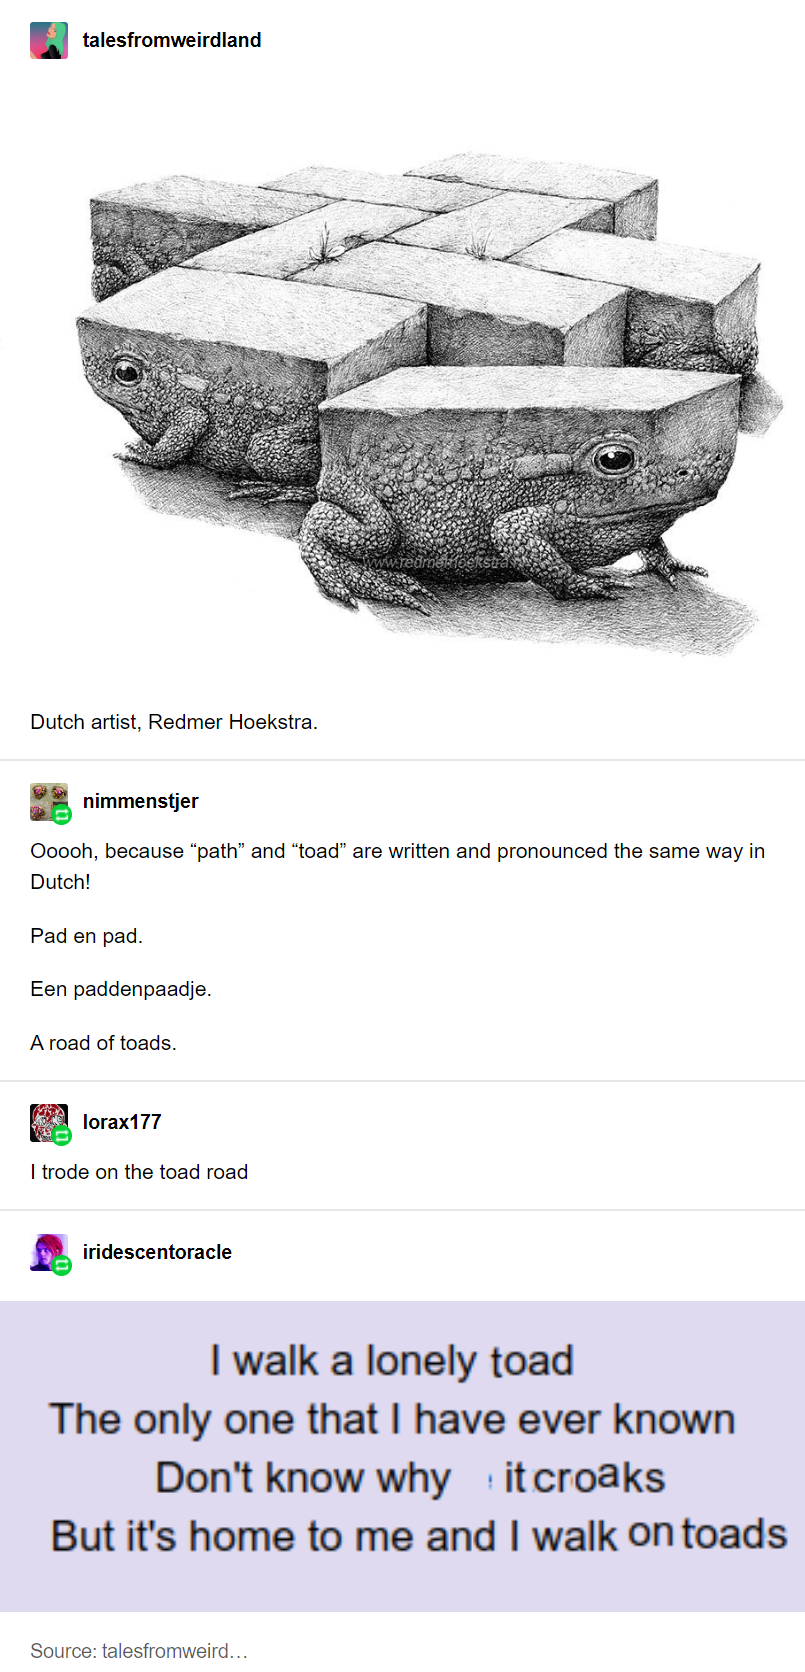 toad road meme - balestrowerdland Duschartst. Remer Honkatts ner Ooooh, because path and road are written and pronounced the same way in Dutch Pod on pod Een paddenpad Aroad of loads Loreet 71 trode on the tooted Iridescentrale I walk a lonely toad The on